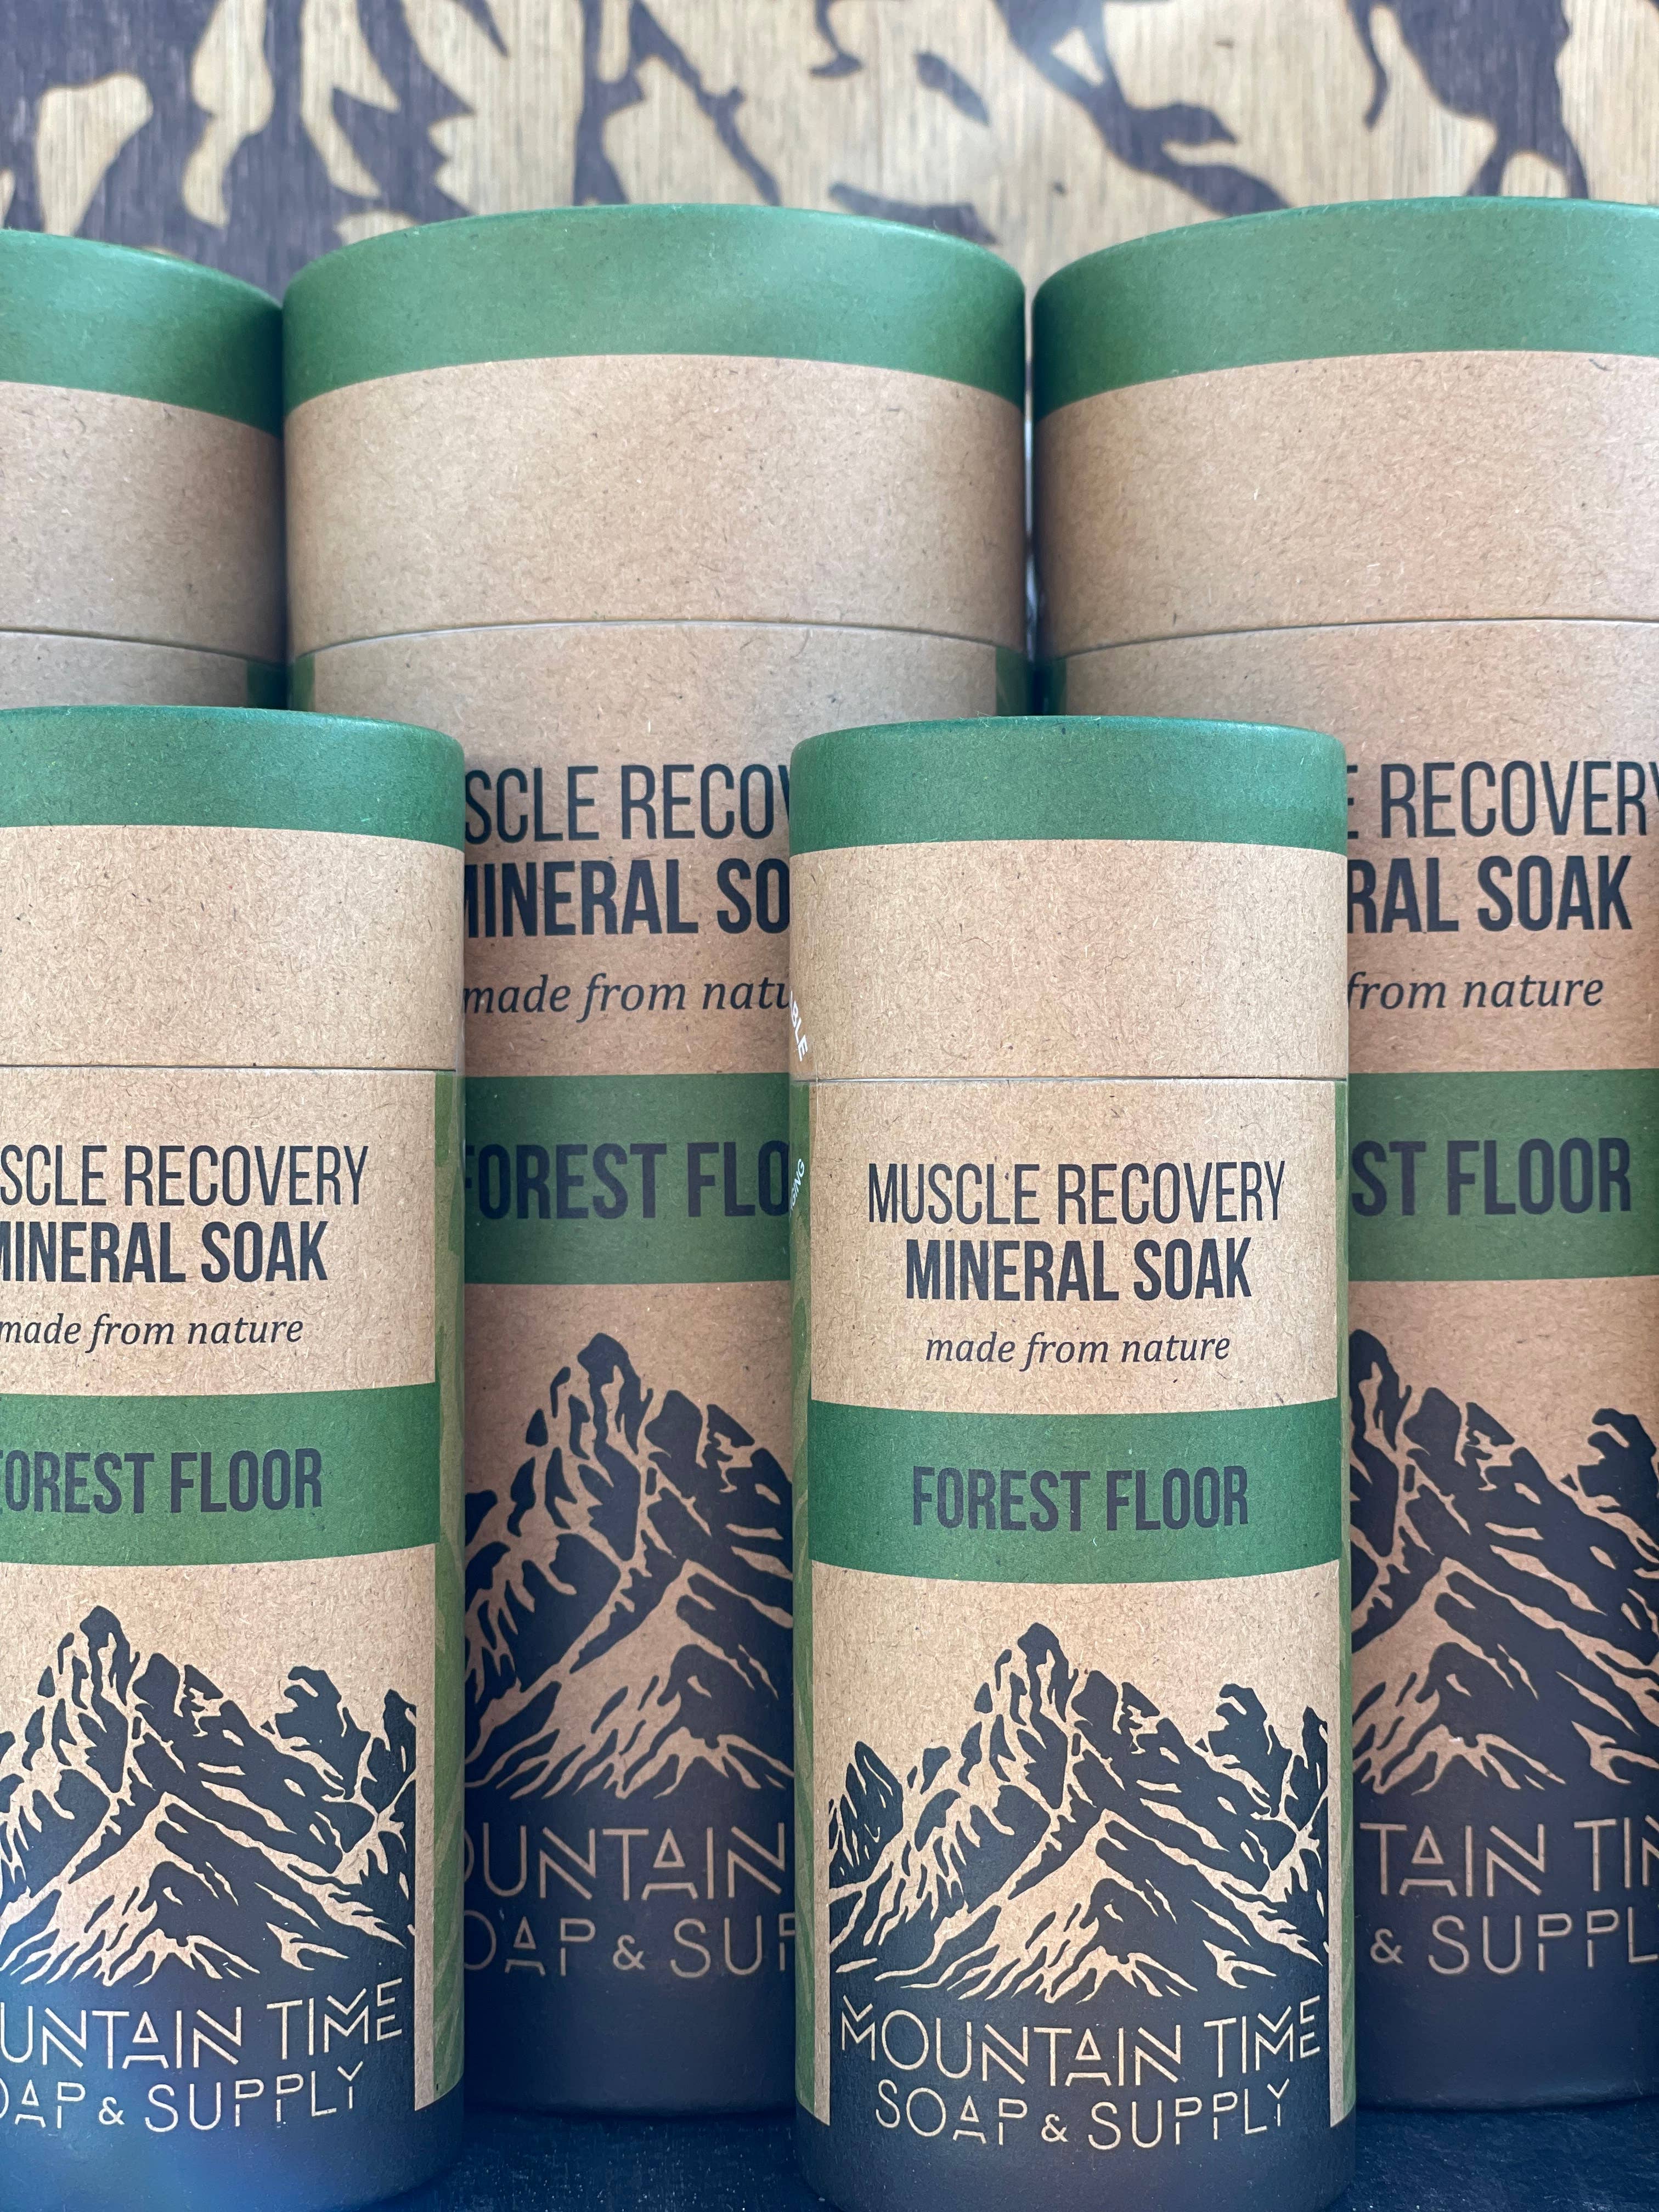 Muscle Recovery Mineral Soak - Small 6 oz.: Forest Floor